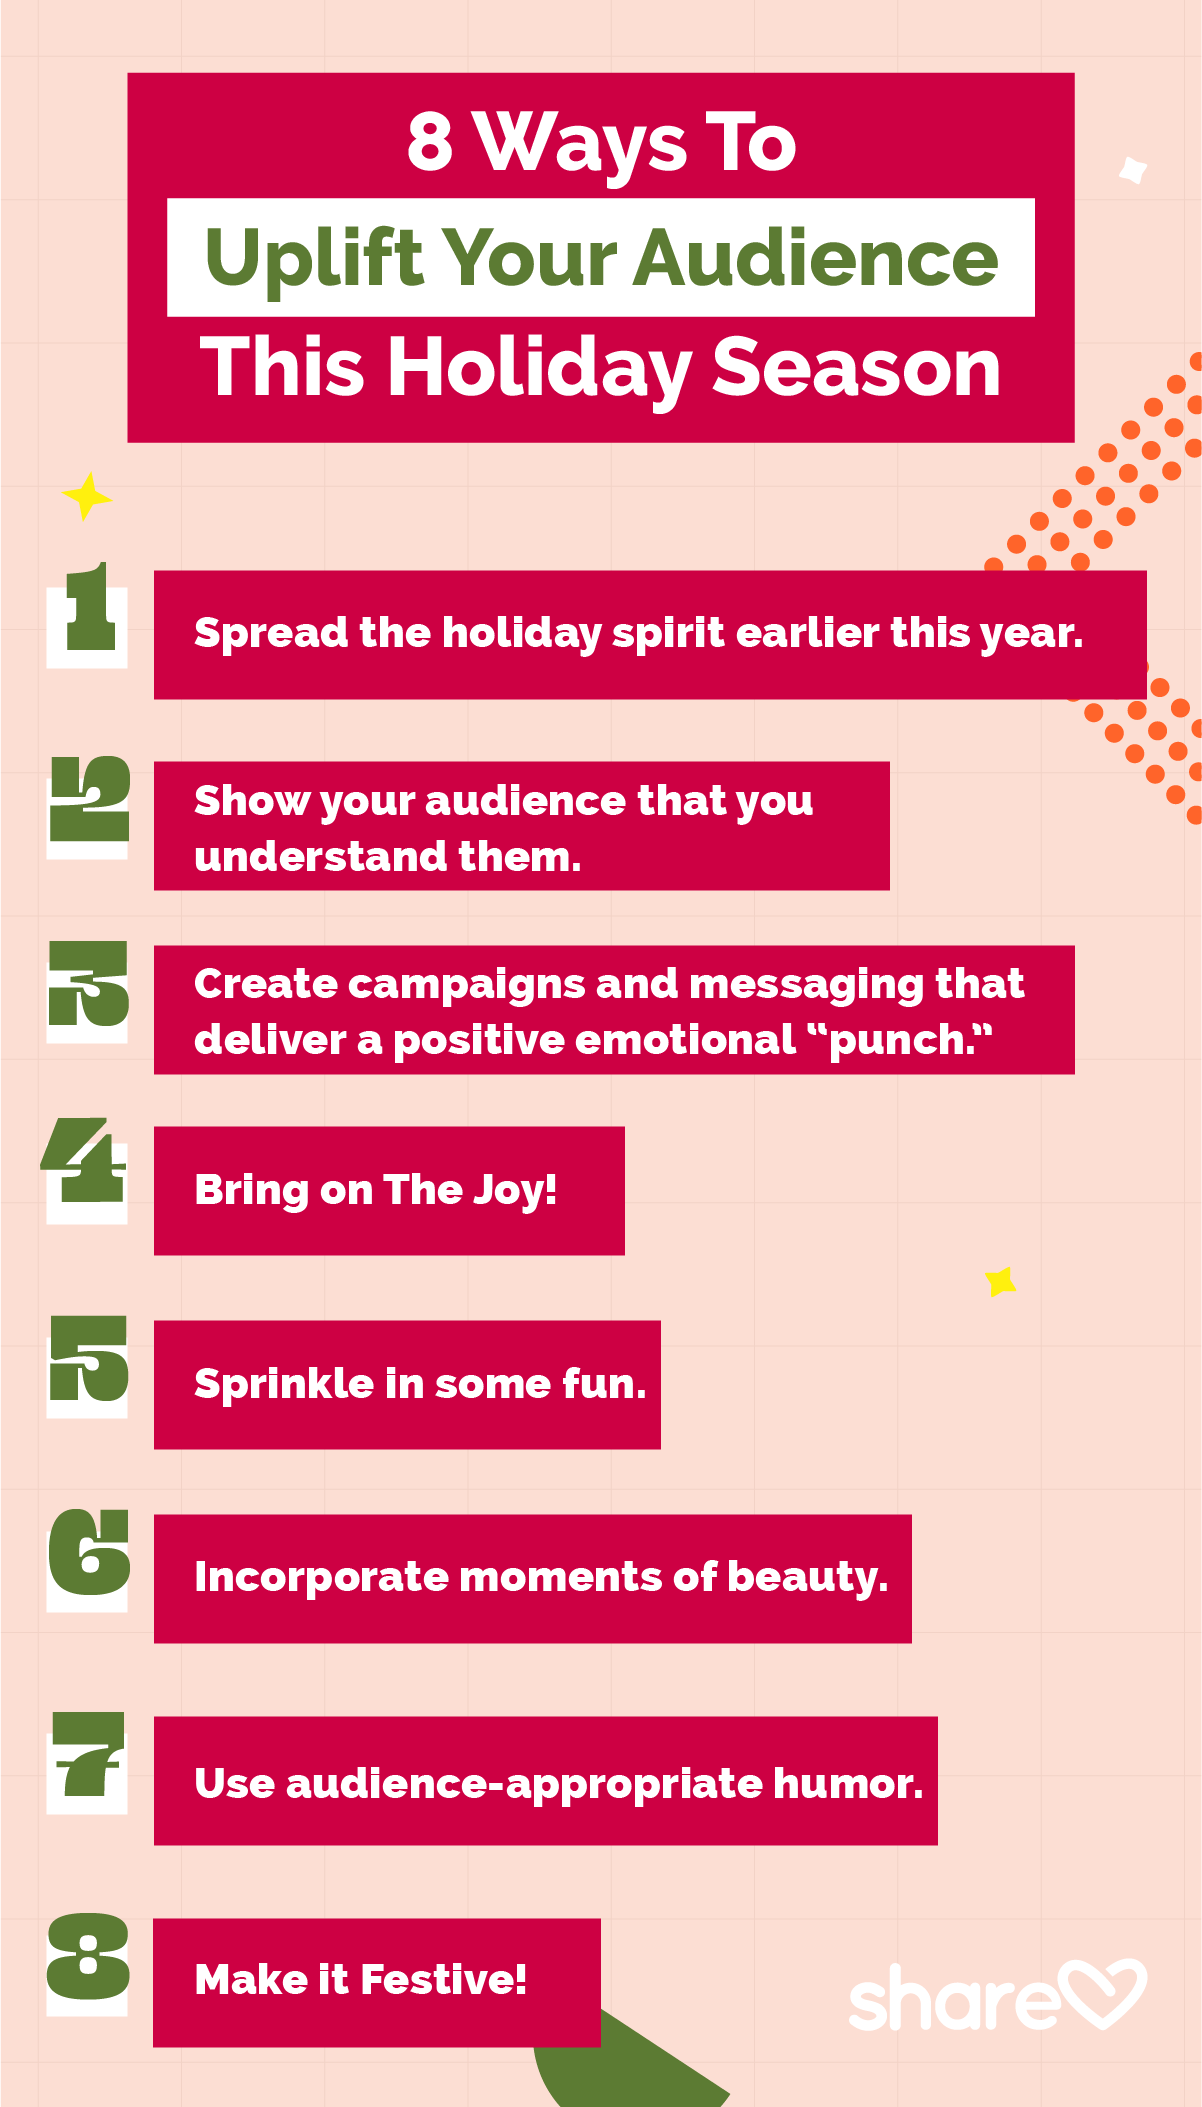 8 Ways To Uplift Your Audience This Holiday Season